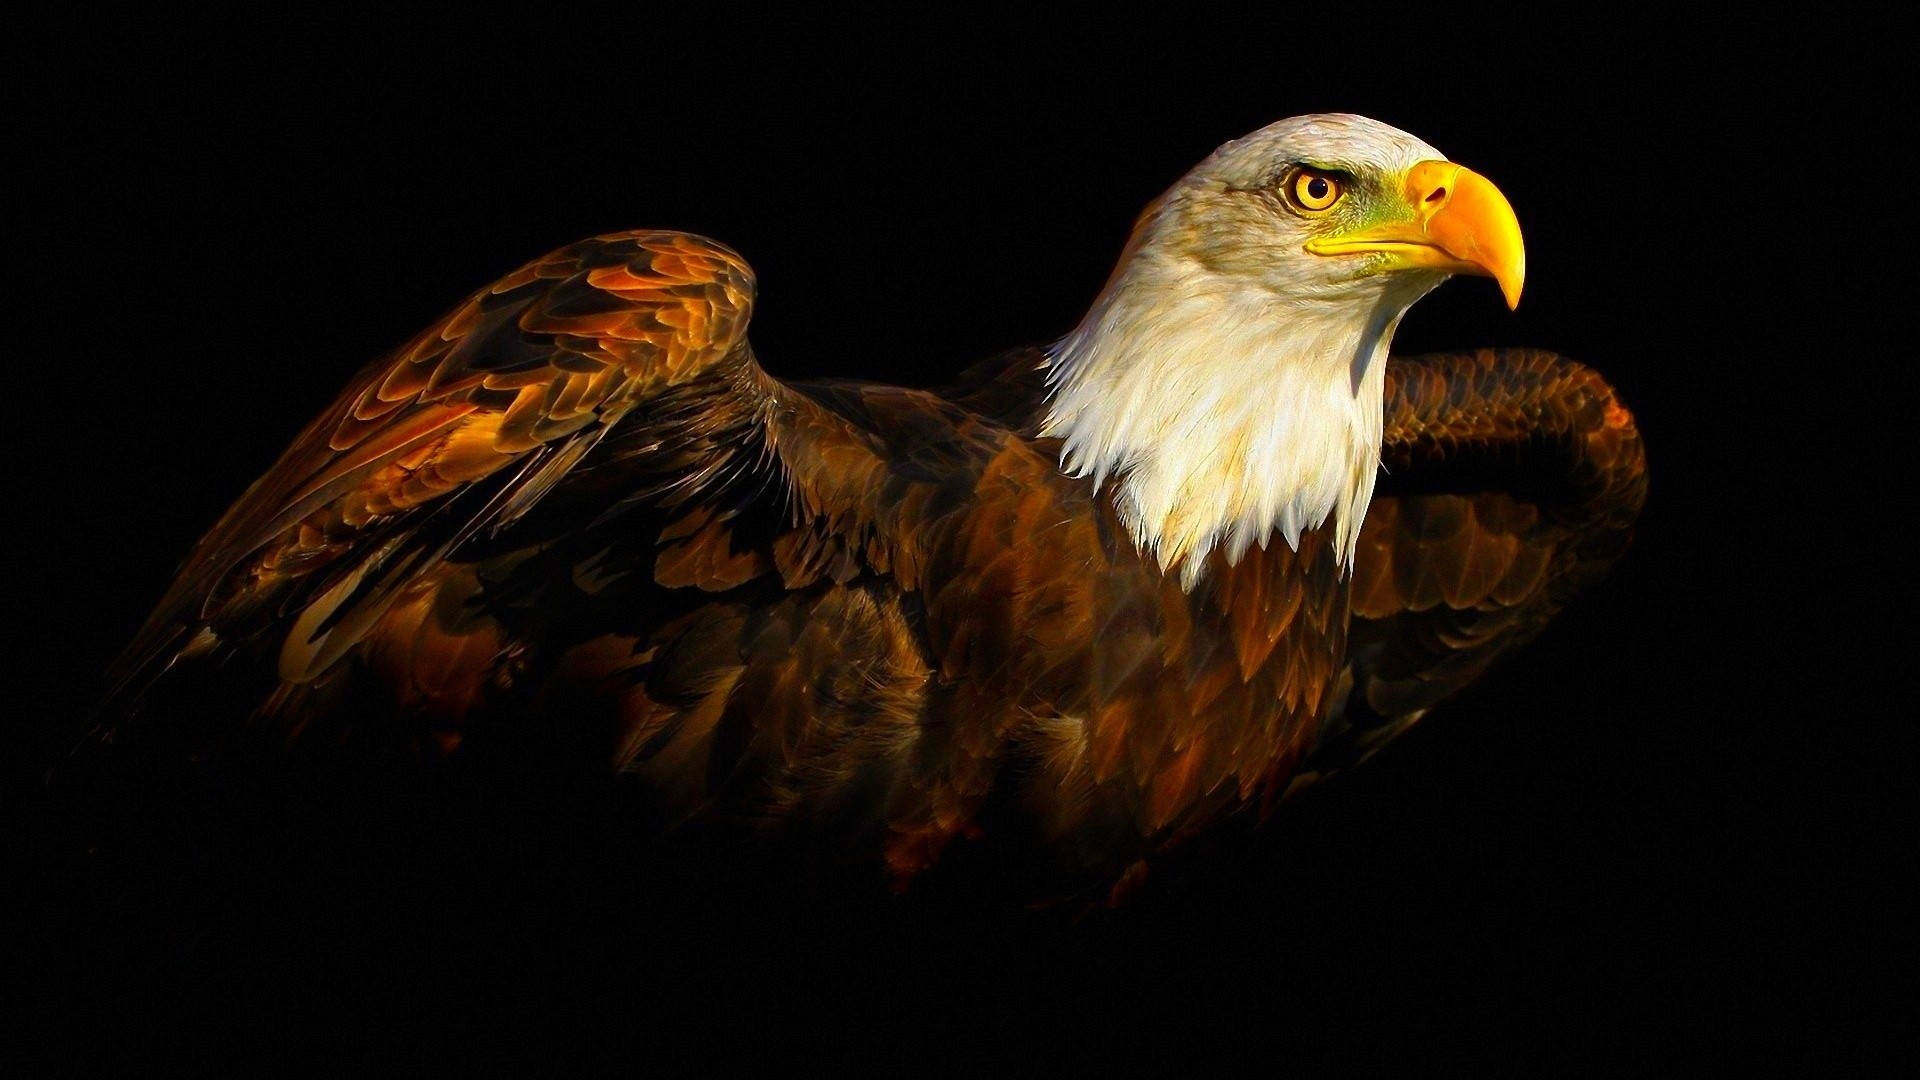 Majestic Eagle Painting on a Dark Background Wallpaper